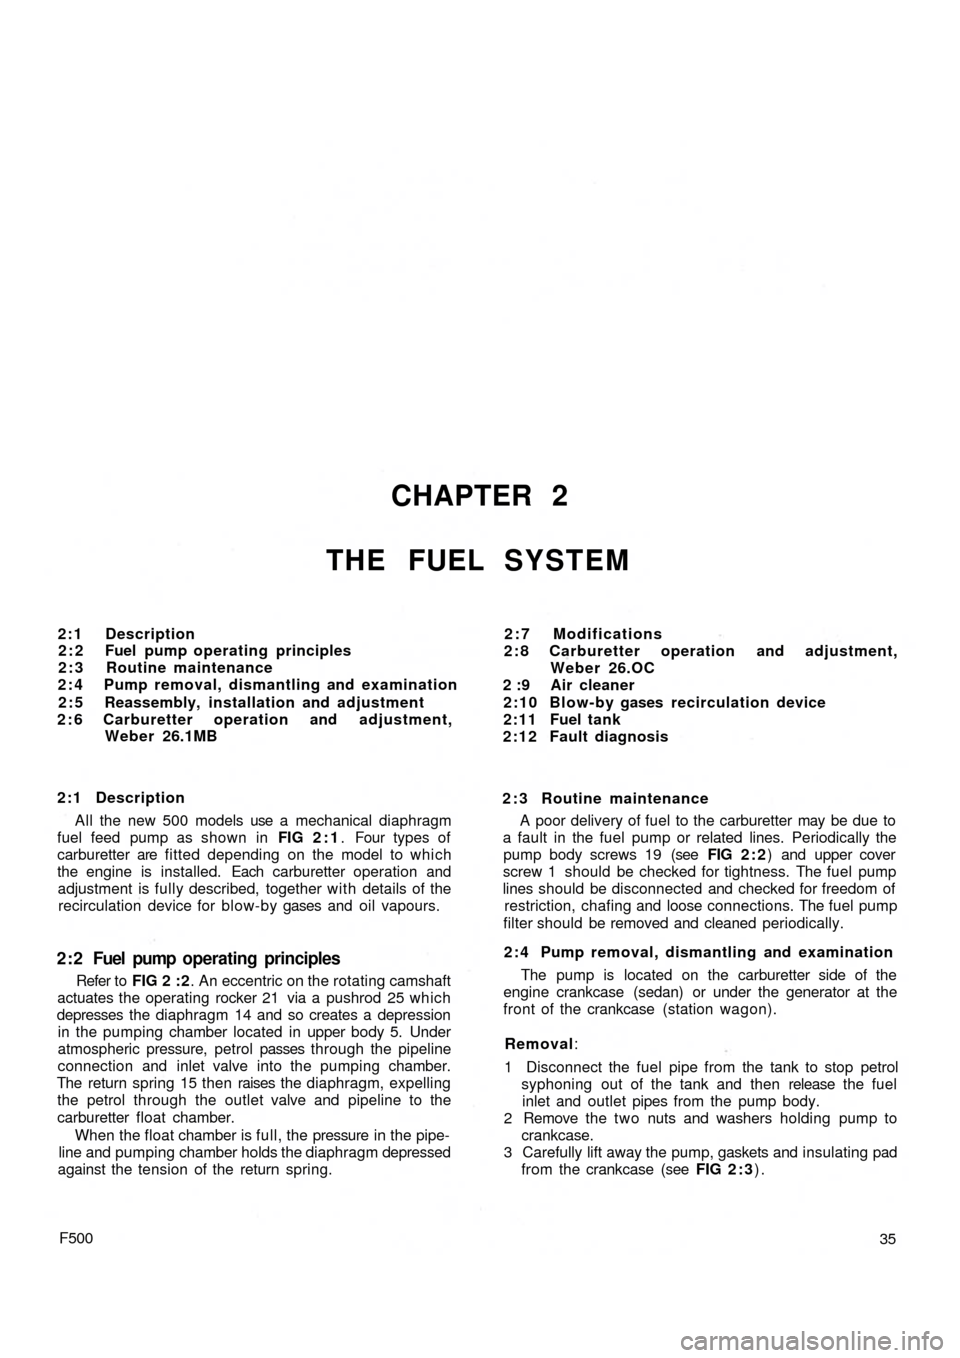 FIAT 500 1957 1.G Owners Manual CHAPTER 2
THE FUEL SYSTEM
2:1 Description
2 : 2 Fuel pump operating principles
2 : 3 Routine maintenance
2 : 4 Pump removal, dismantling and examination
2 : 5 Reassembly, installation and adjustment
2